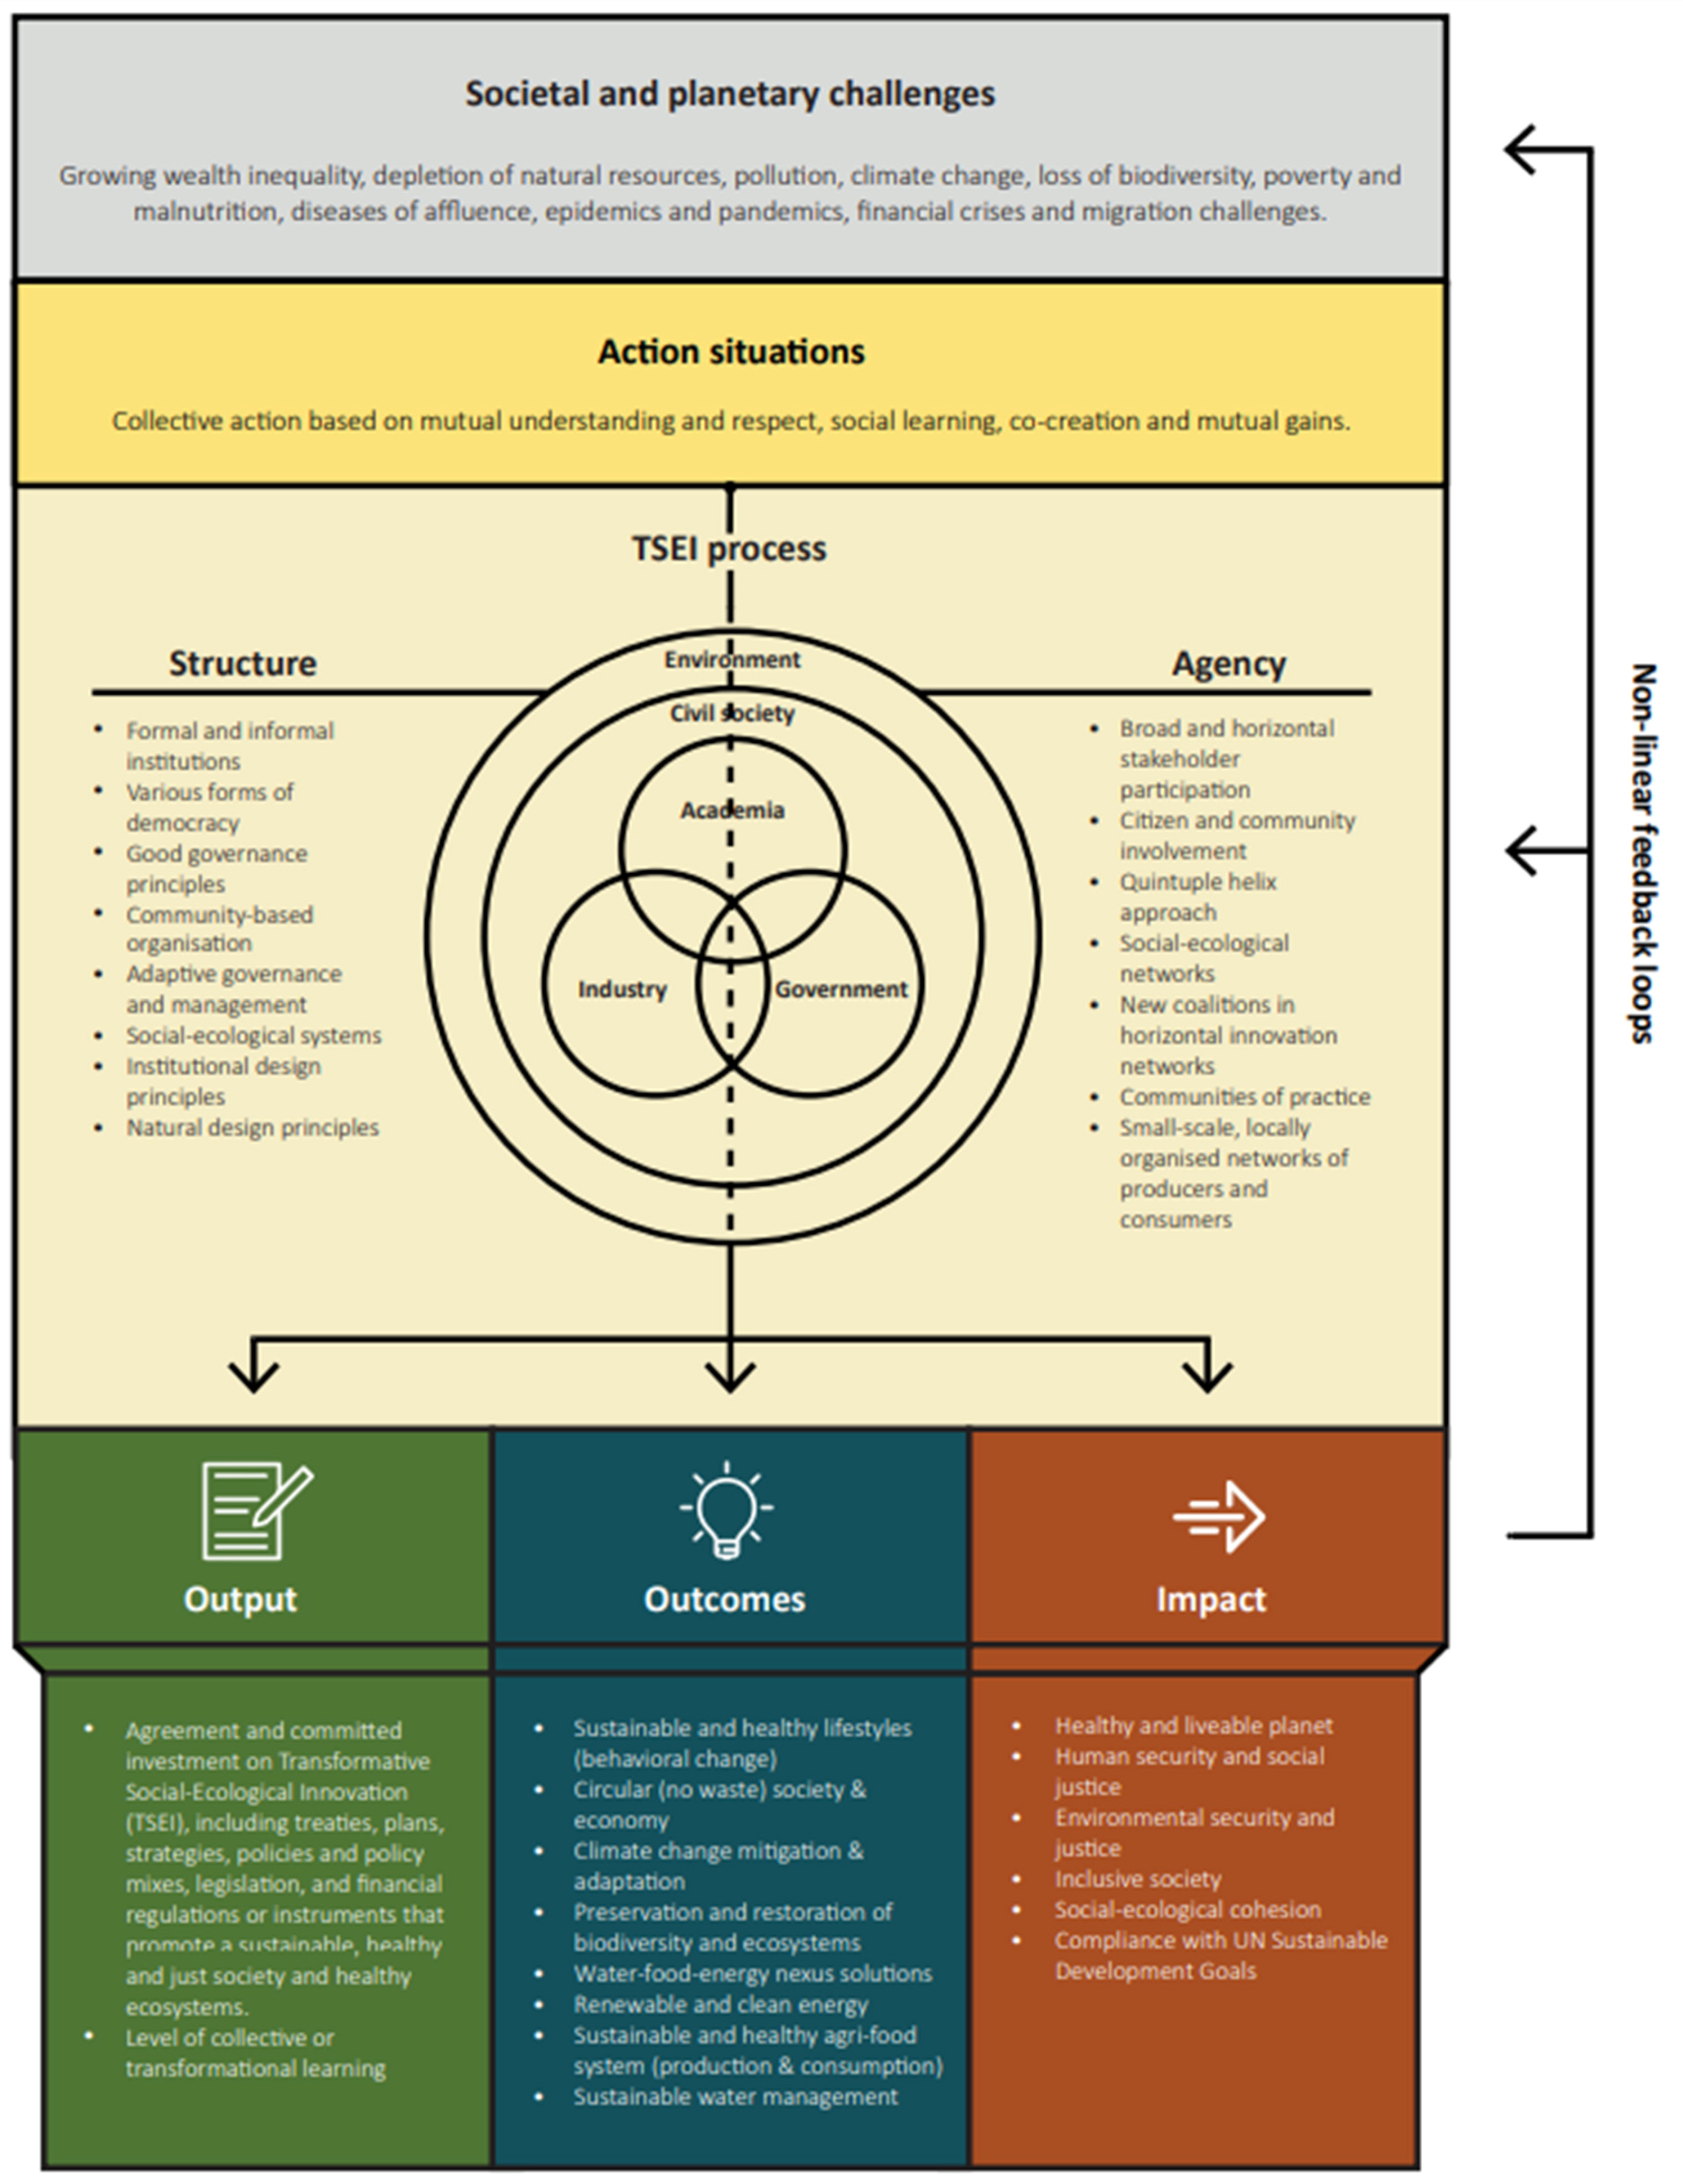 Gallery of How Emerging Practices Approach Sustainability in